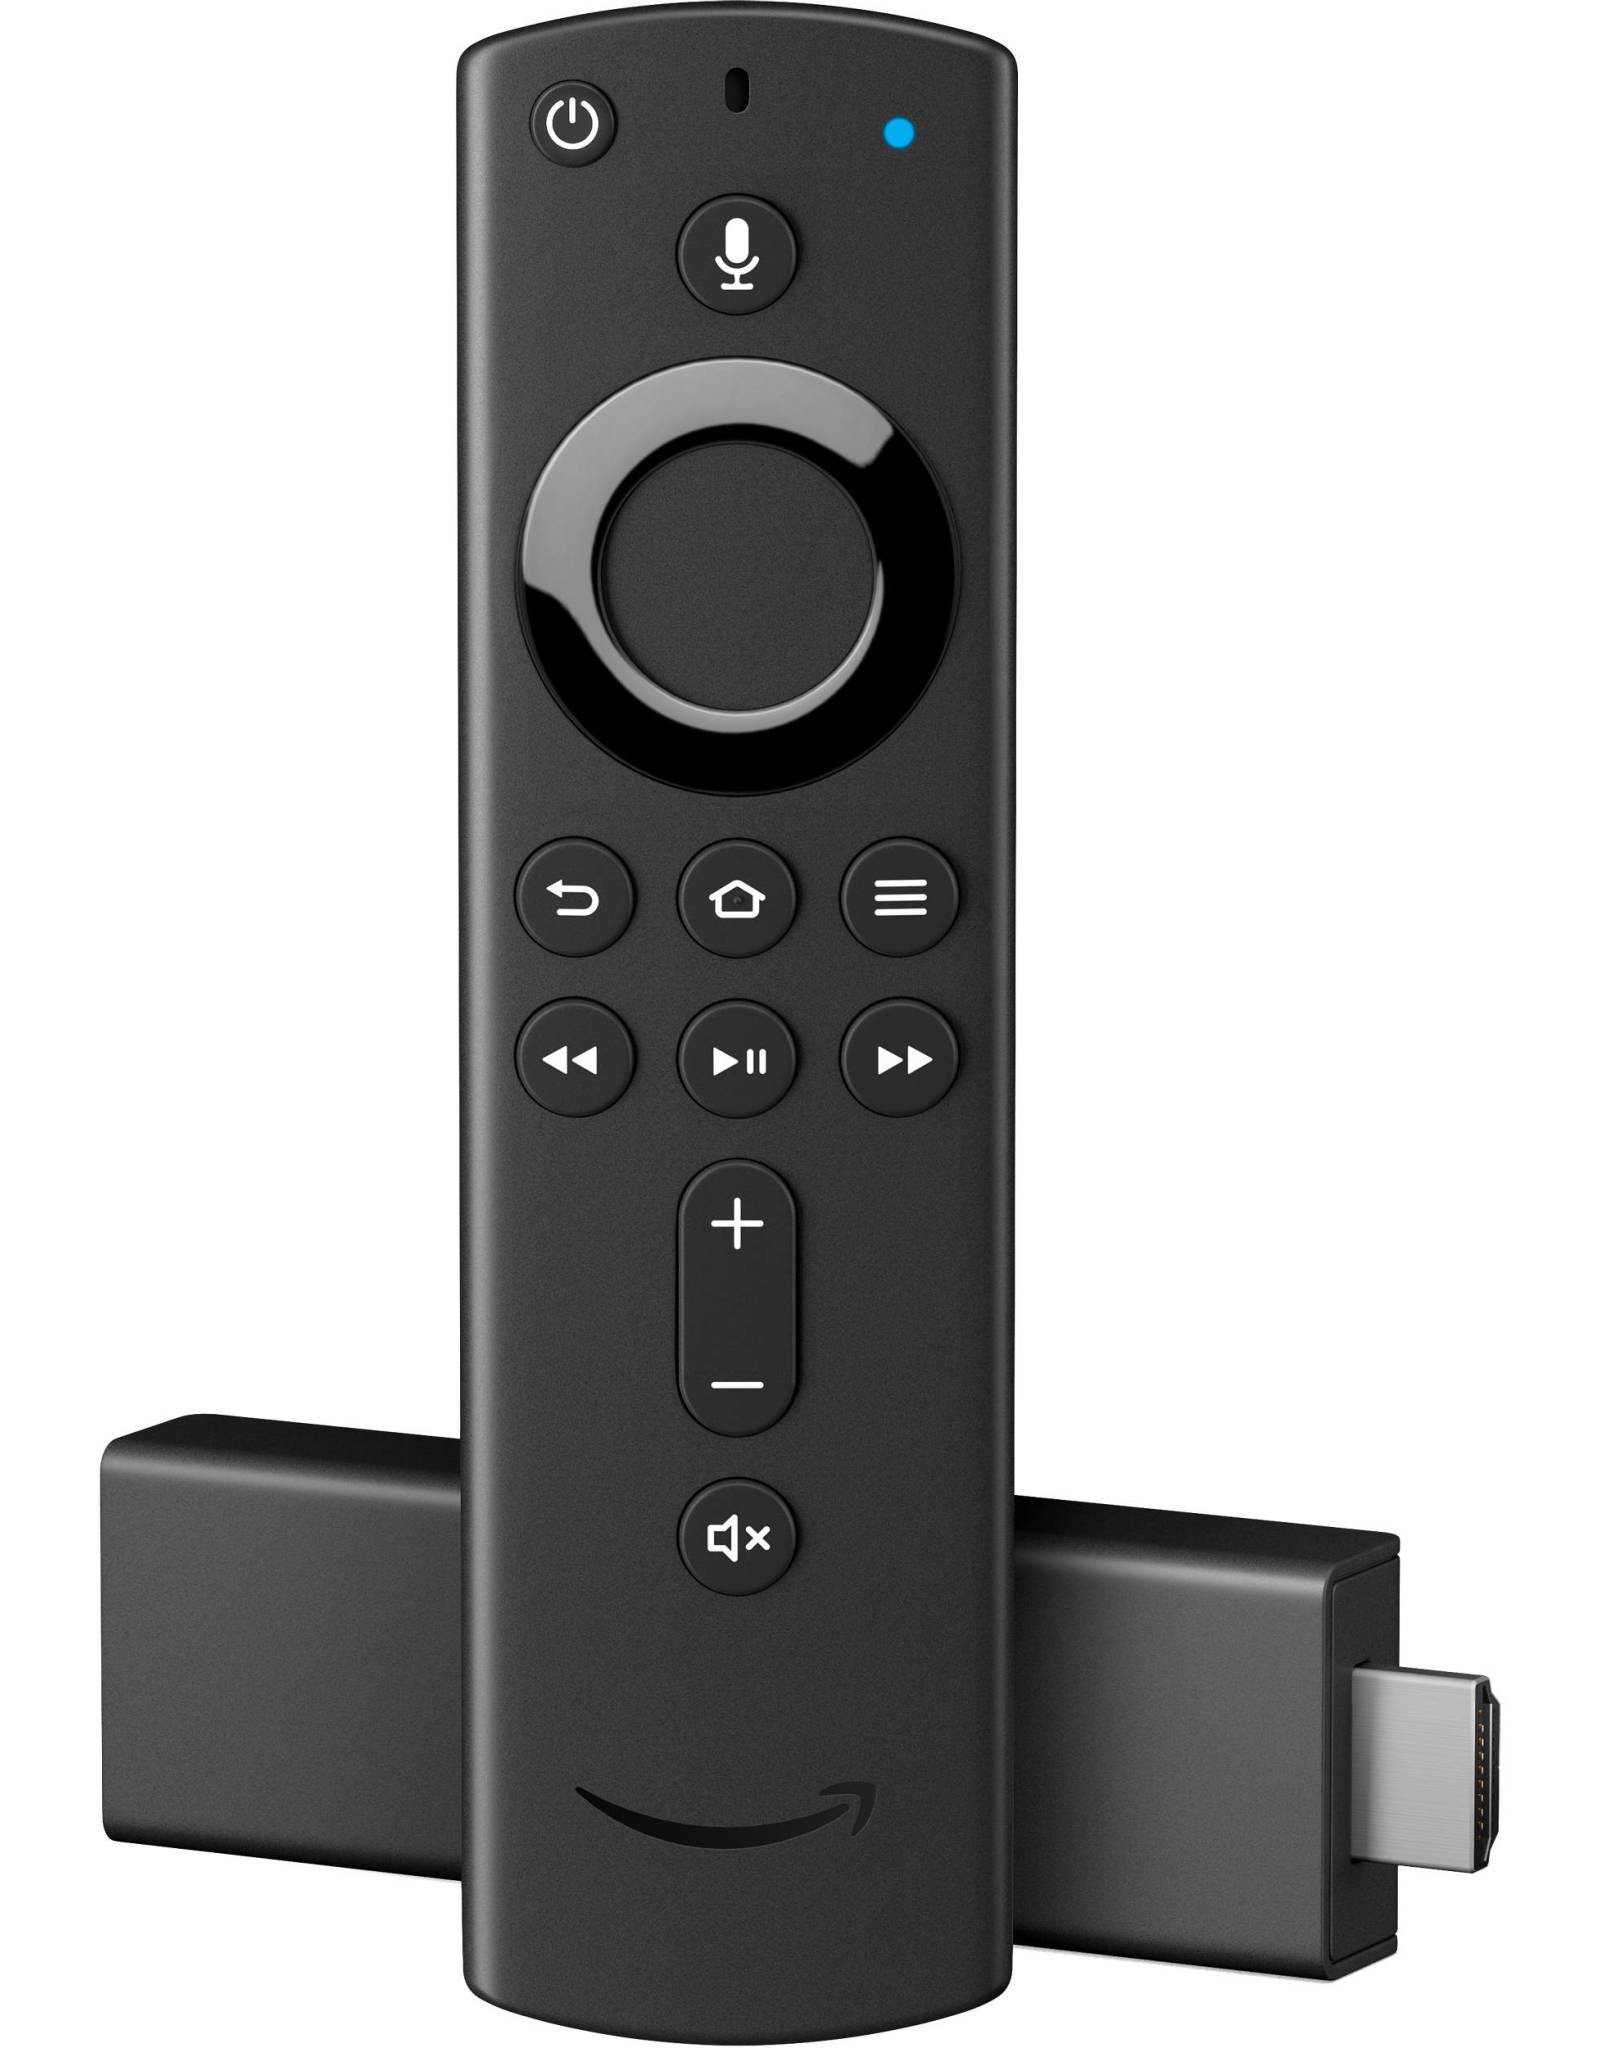 Amazon Amazon Fire TV Stick 4K streaming device with Alexa built in, Ultra HD, Dolby Vision, includes the Alexa Voice Remote